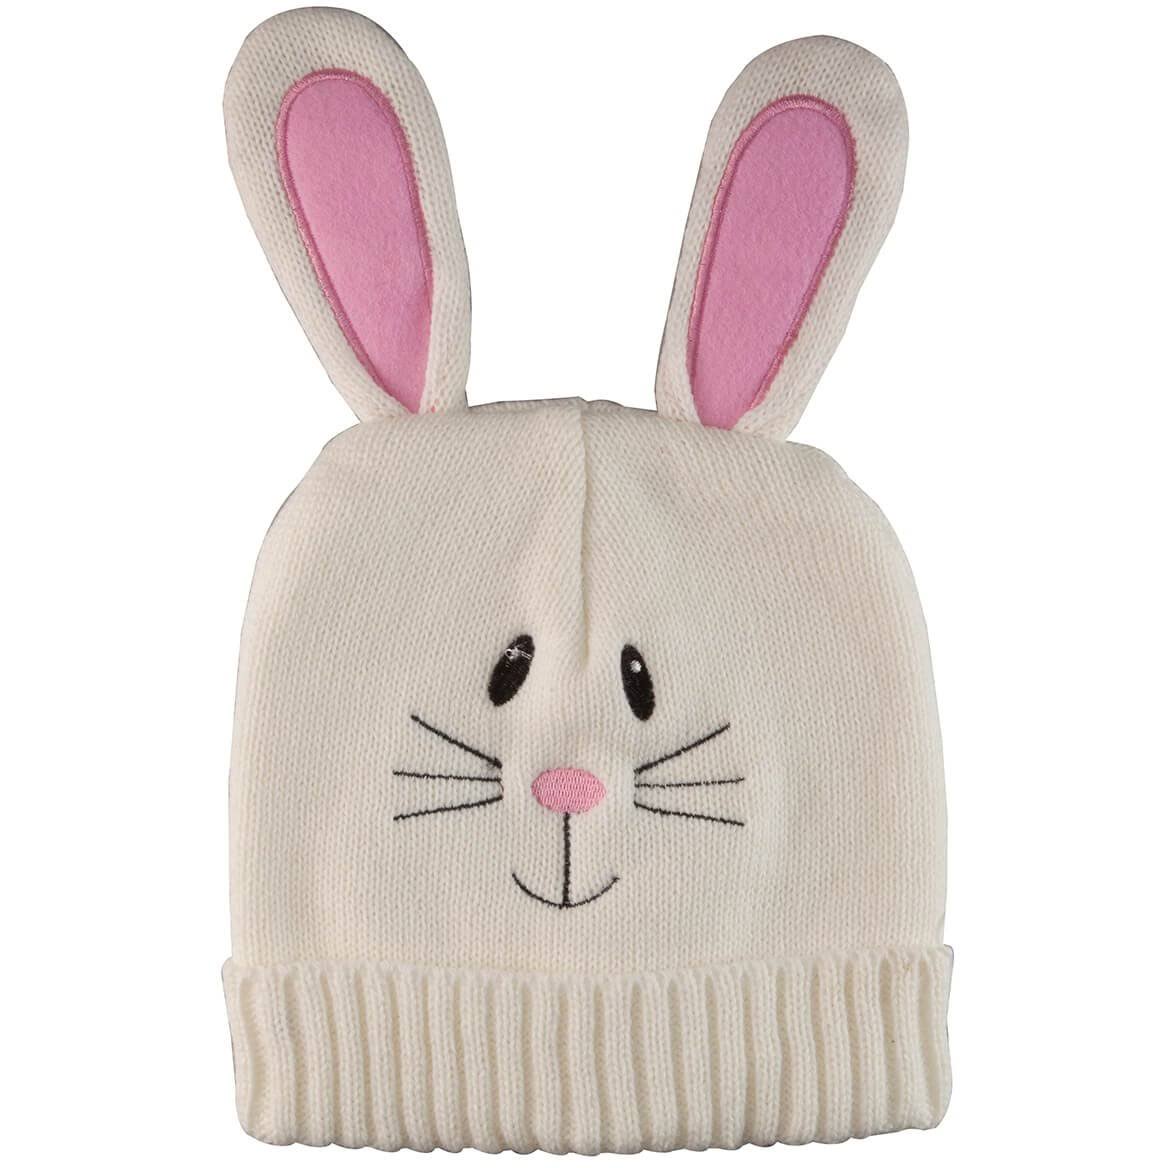 DM Merchandising Knitted Easter Bunny Hat Children's Beanies Pink and